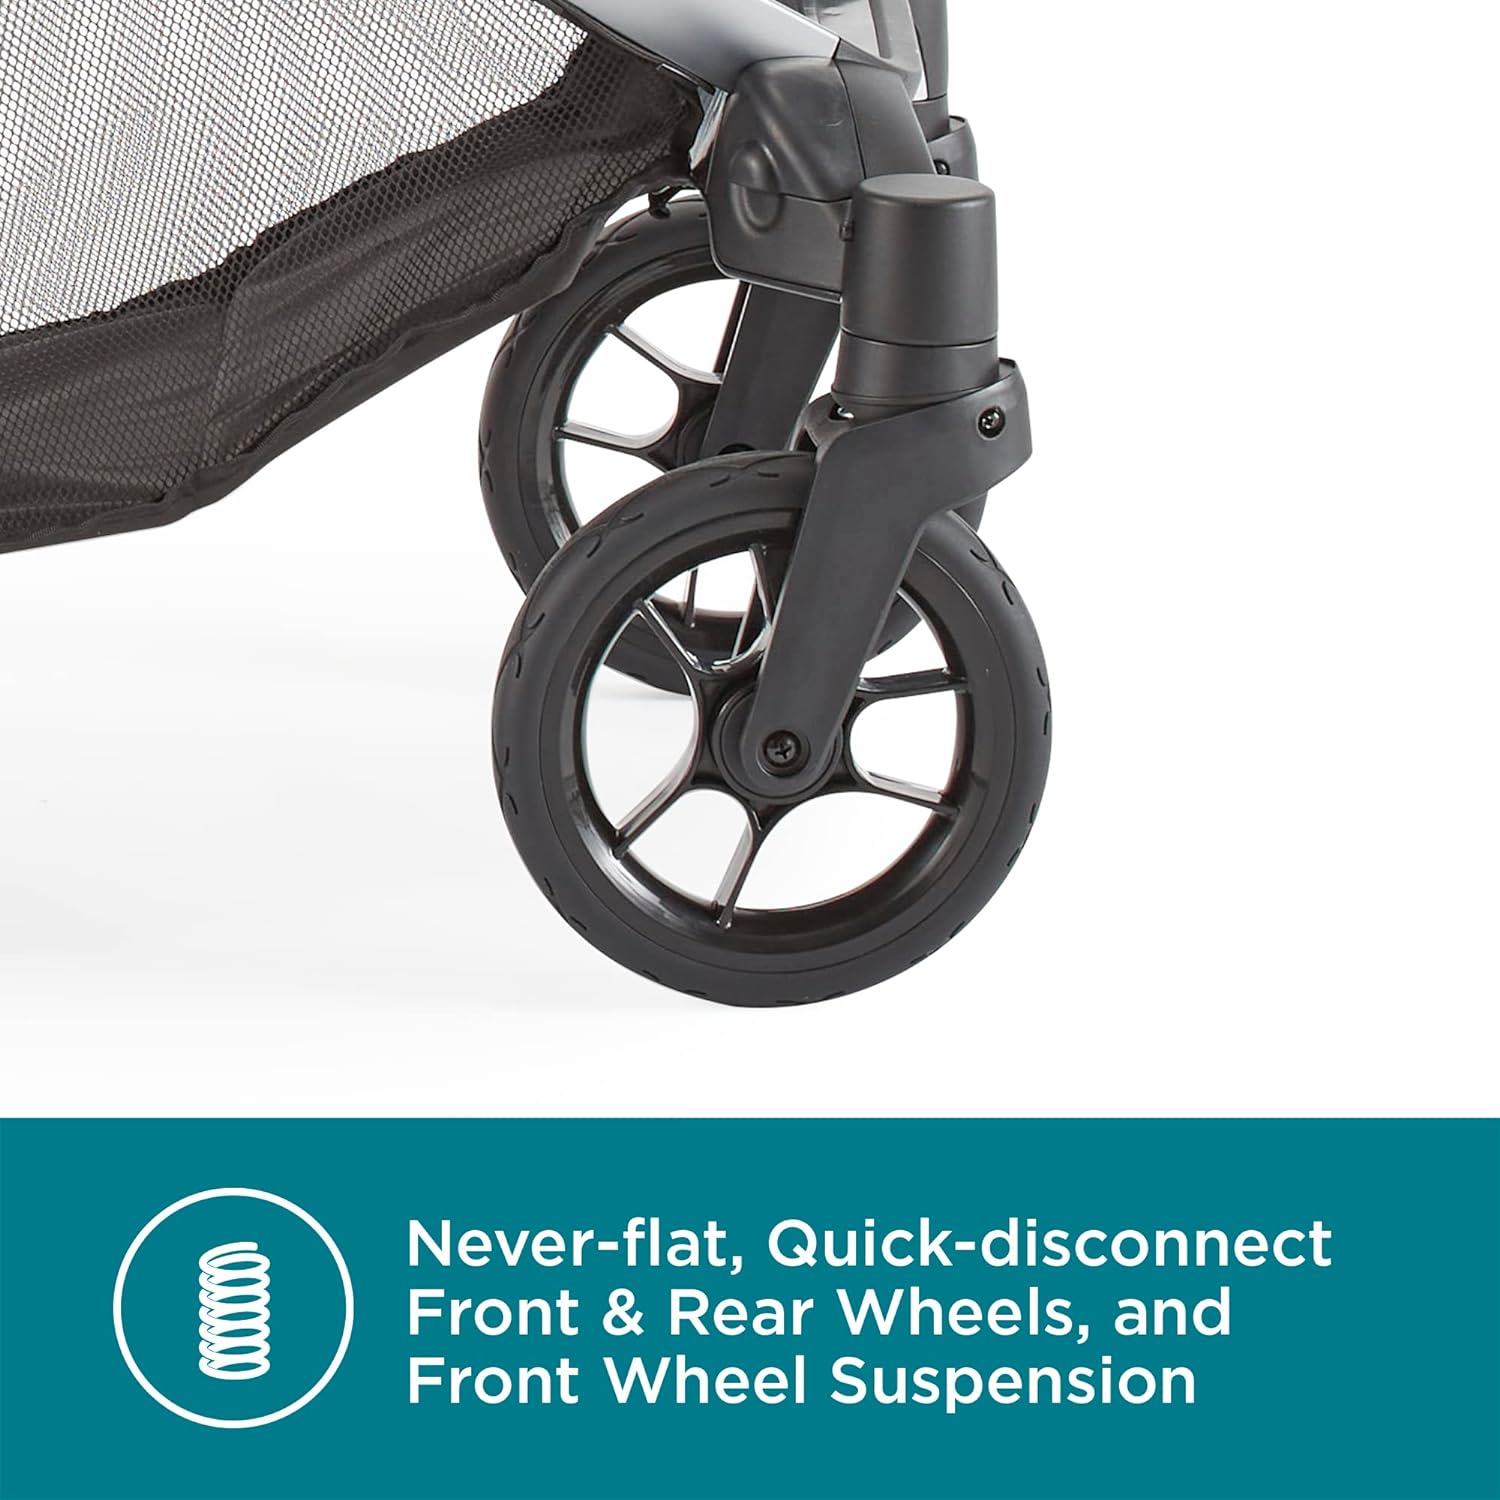 Contours Legacy Convertible Baby Stroller and Toddler Stroller Single-to-Double Options, Reversible Seats, UPF 50 Sun Canopy, Height Adjustable Handle, 5-Point Safety Harness - Graphite Gray - Contours Legacy Convertible Baby Stroller Review